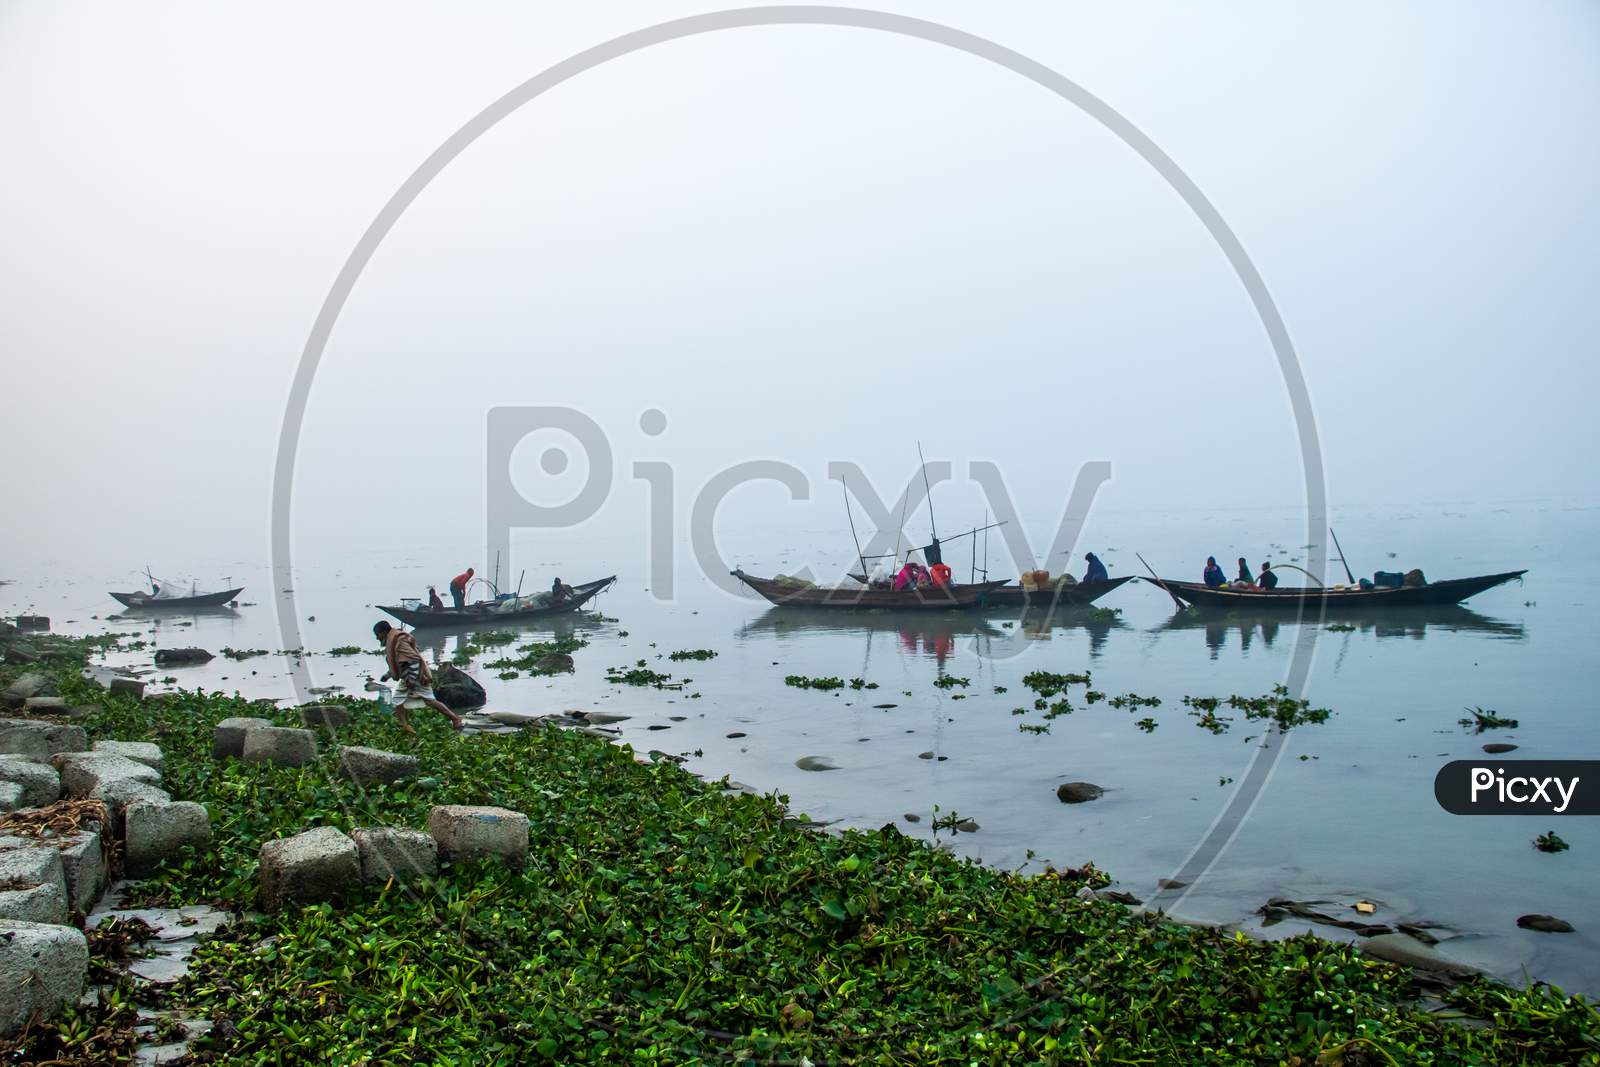 Fisherman Taking Preparation For Fishing In The Foggy Winter Morning